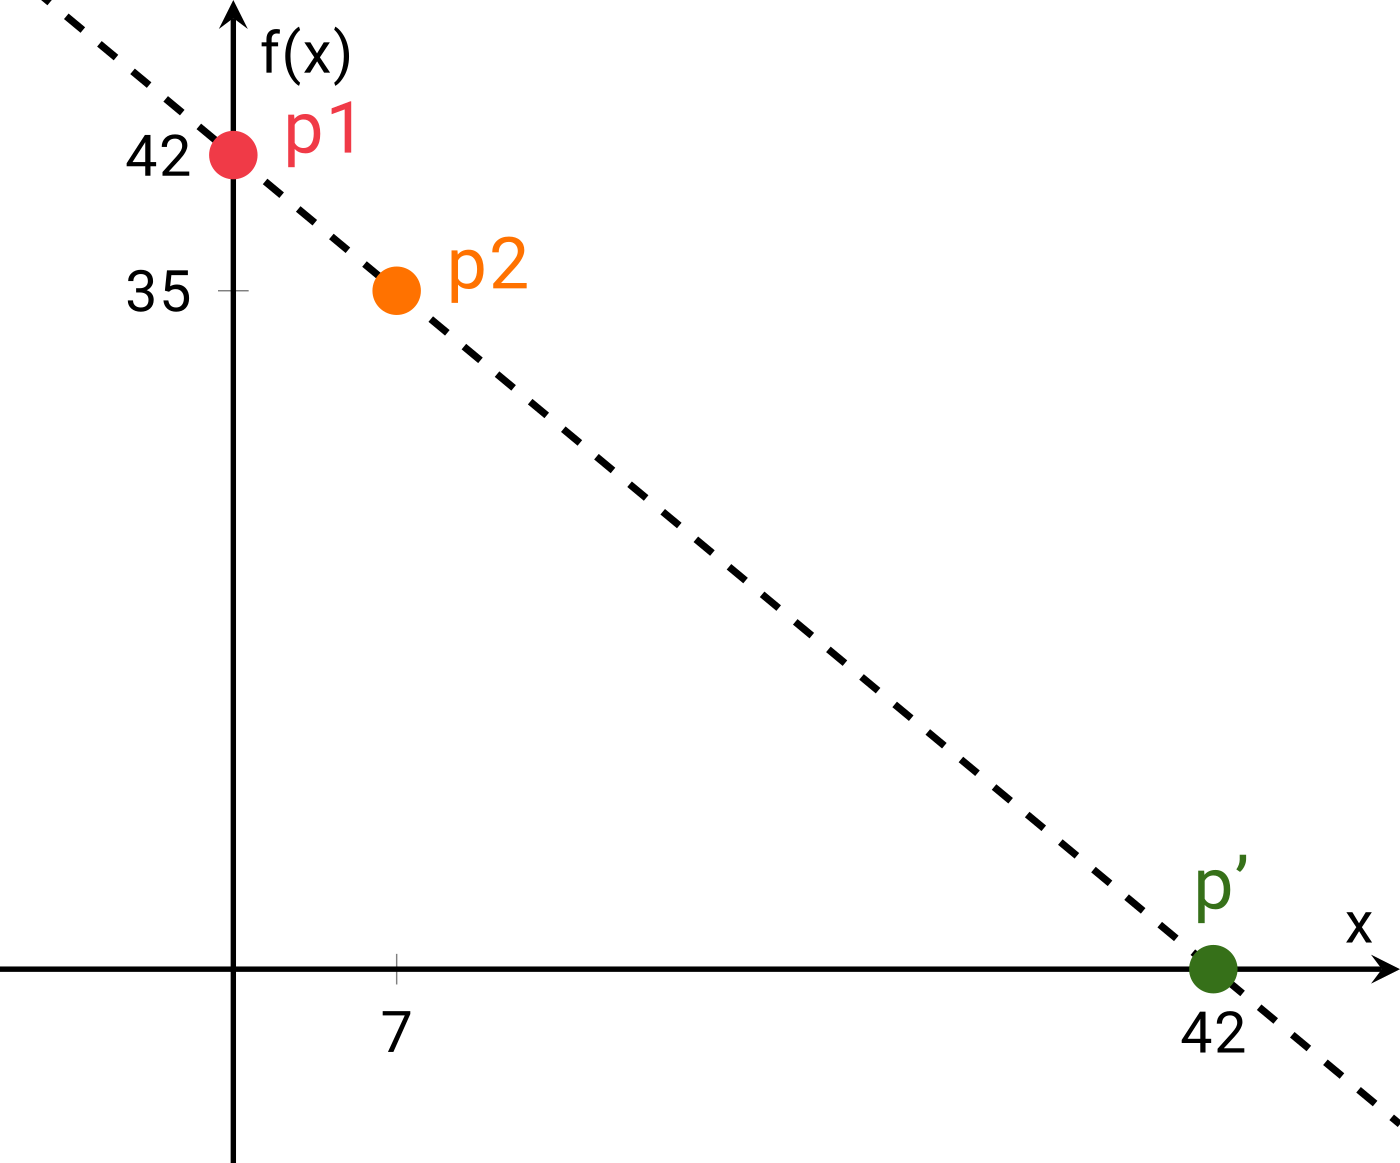 Known points p1 and p2 let us derive point p’ whose x-coordinate corresponds to the new predicted input.